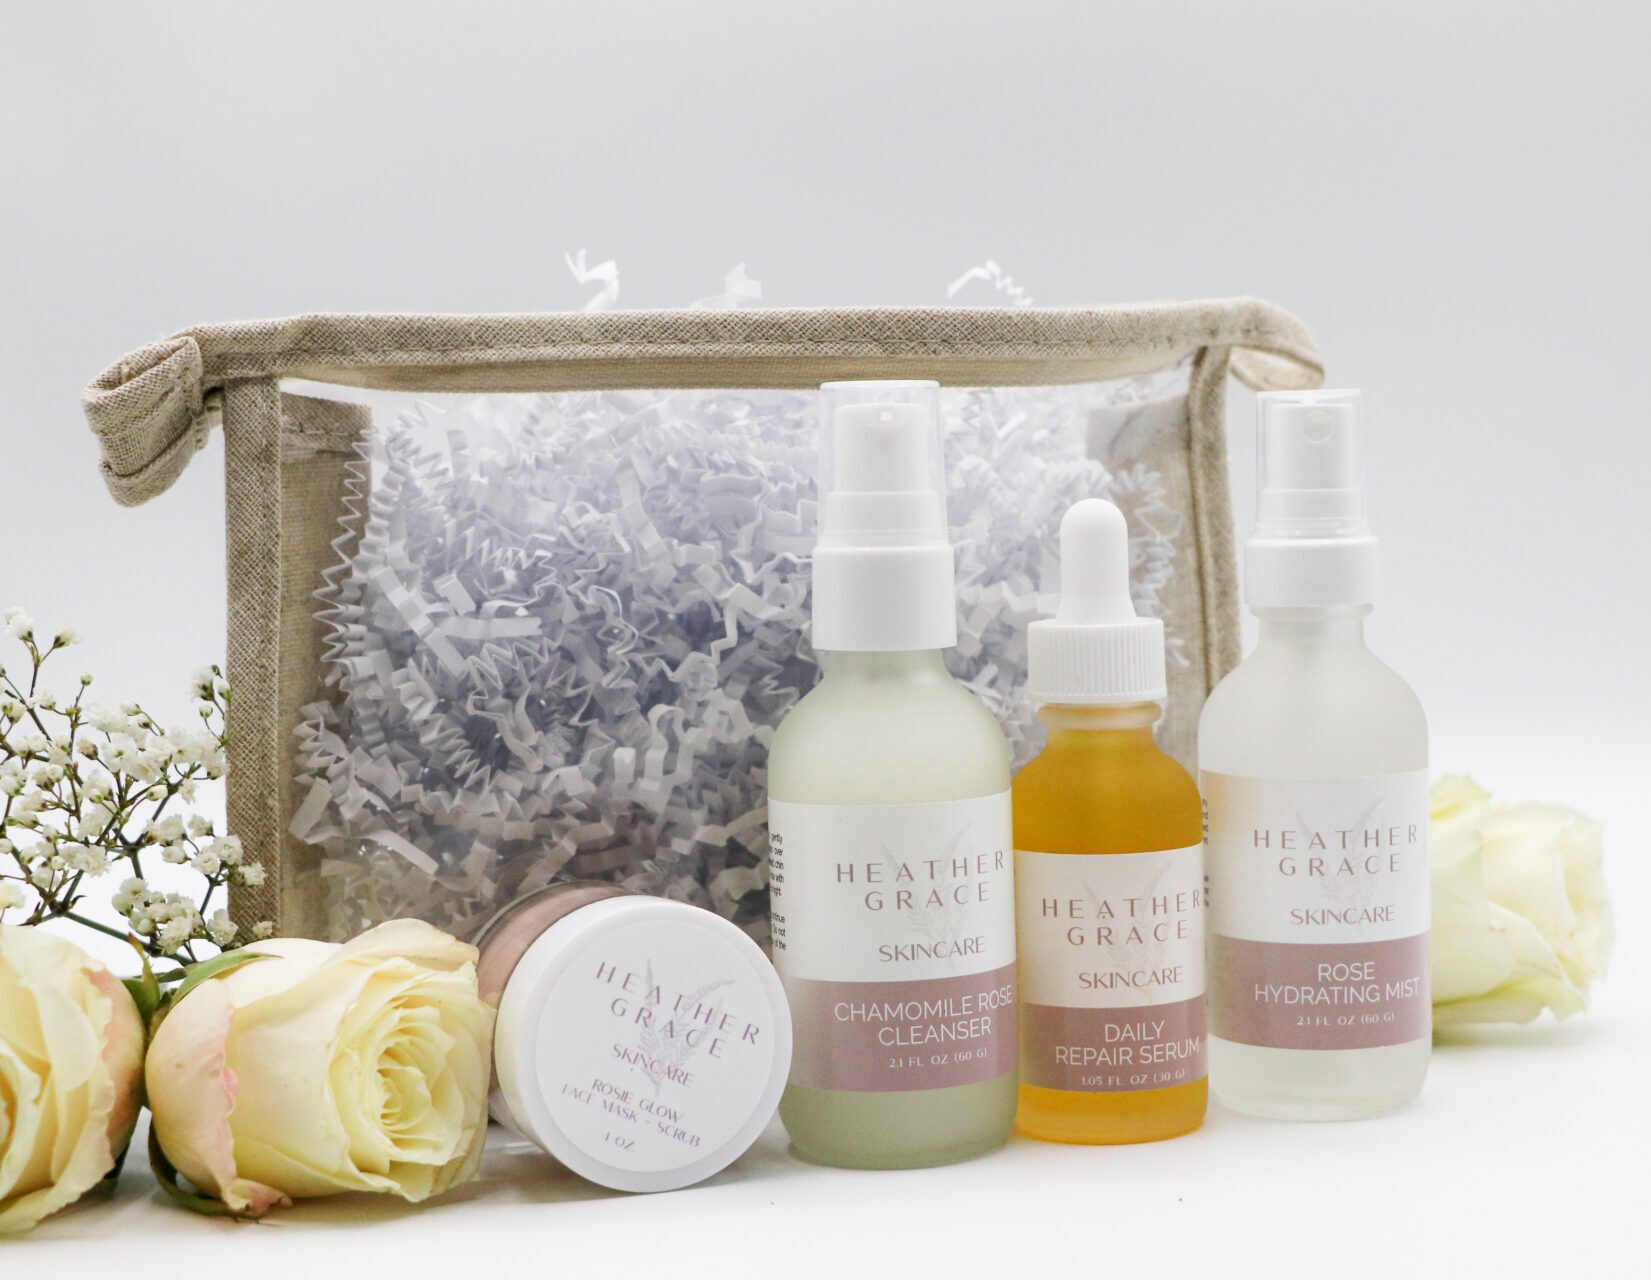 A skincare set from "Heather Grace Skincare" displayed against a white background. The set includes a "Chamomile Rose Cleanser", a "Daily Repair Serum", and a "Rose Hydrating Mist". Adjacent to the products is a white jar labeled "Rose Glow Facial Mask + Scrub". The products are arranged next to a transparent pouch filled with white paper shreds, fresh white baby's breath flowers, and two soft yellow roses. Is this conversation helpful so far?